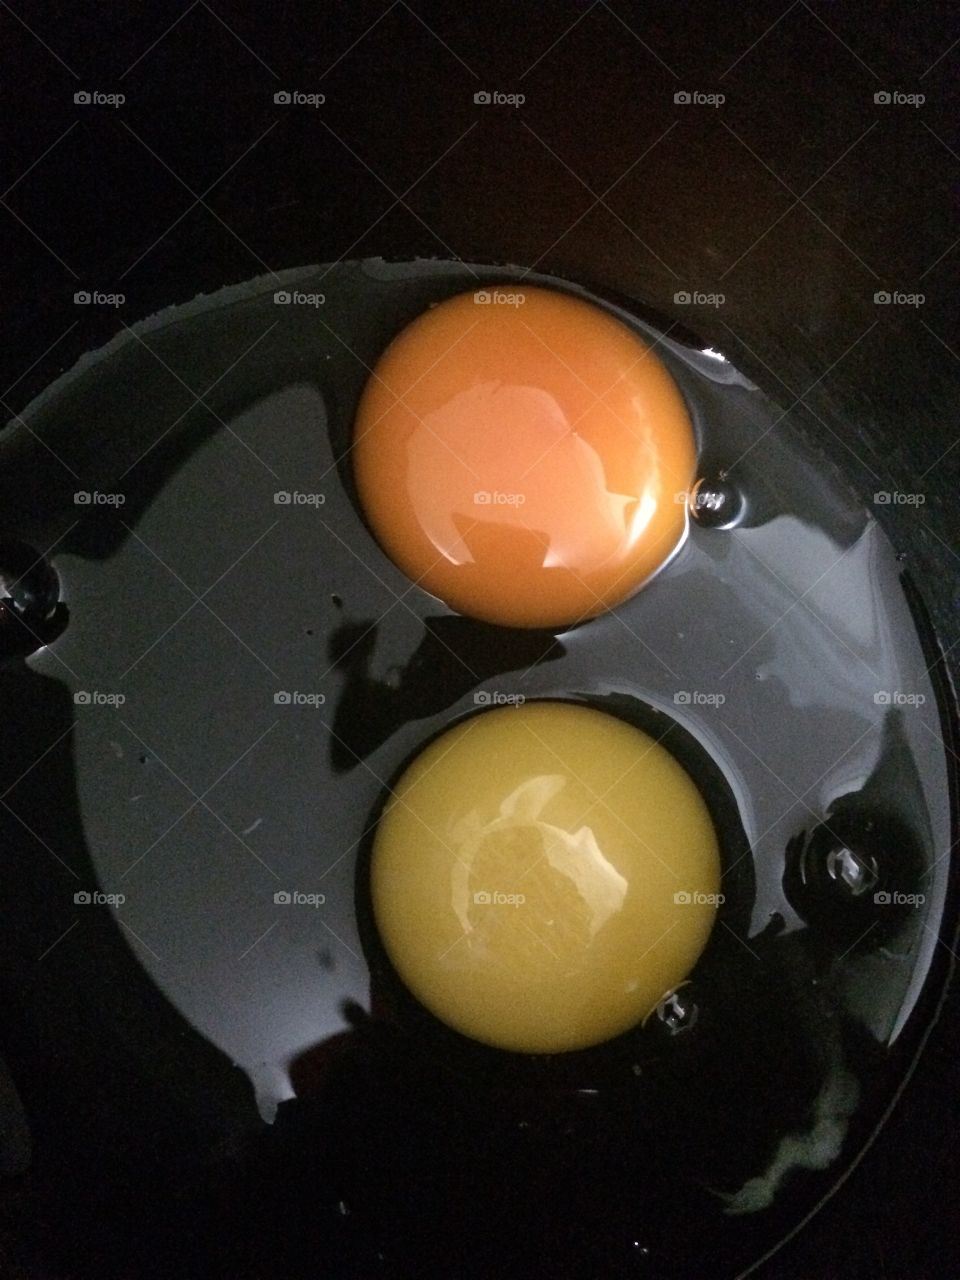 Two eggs 